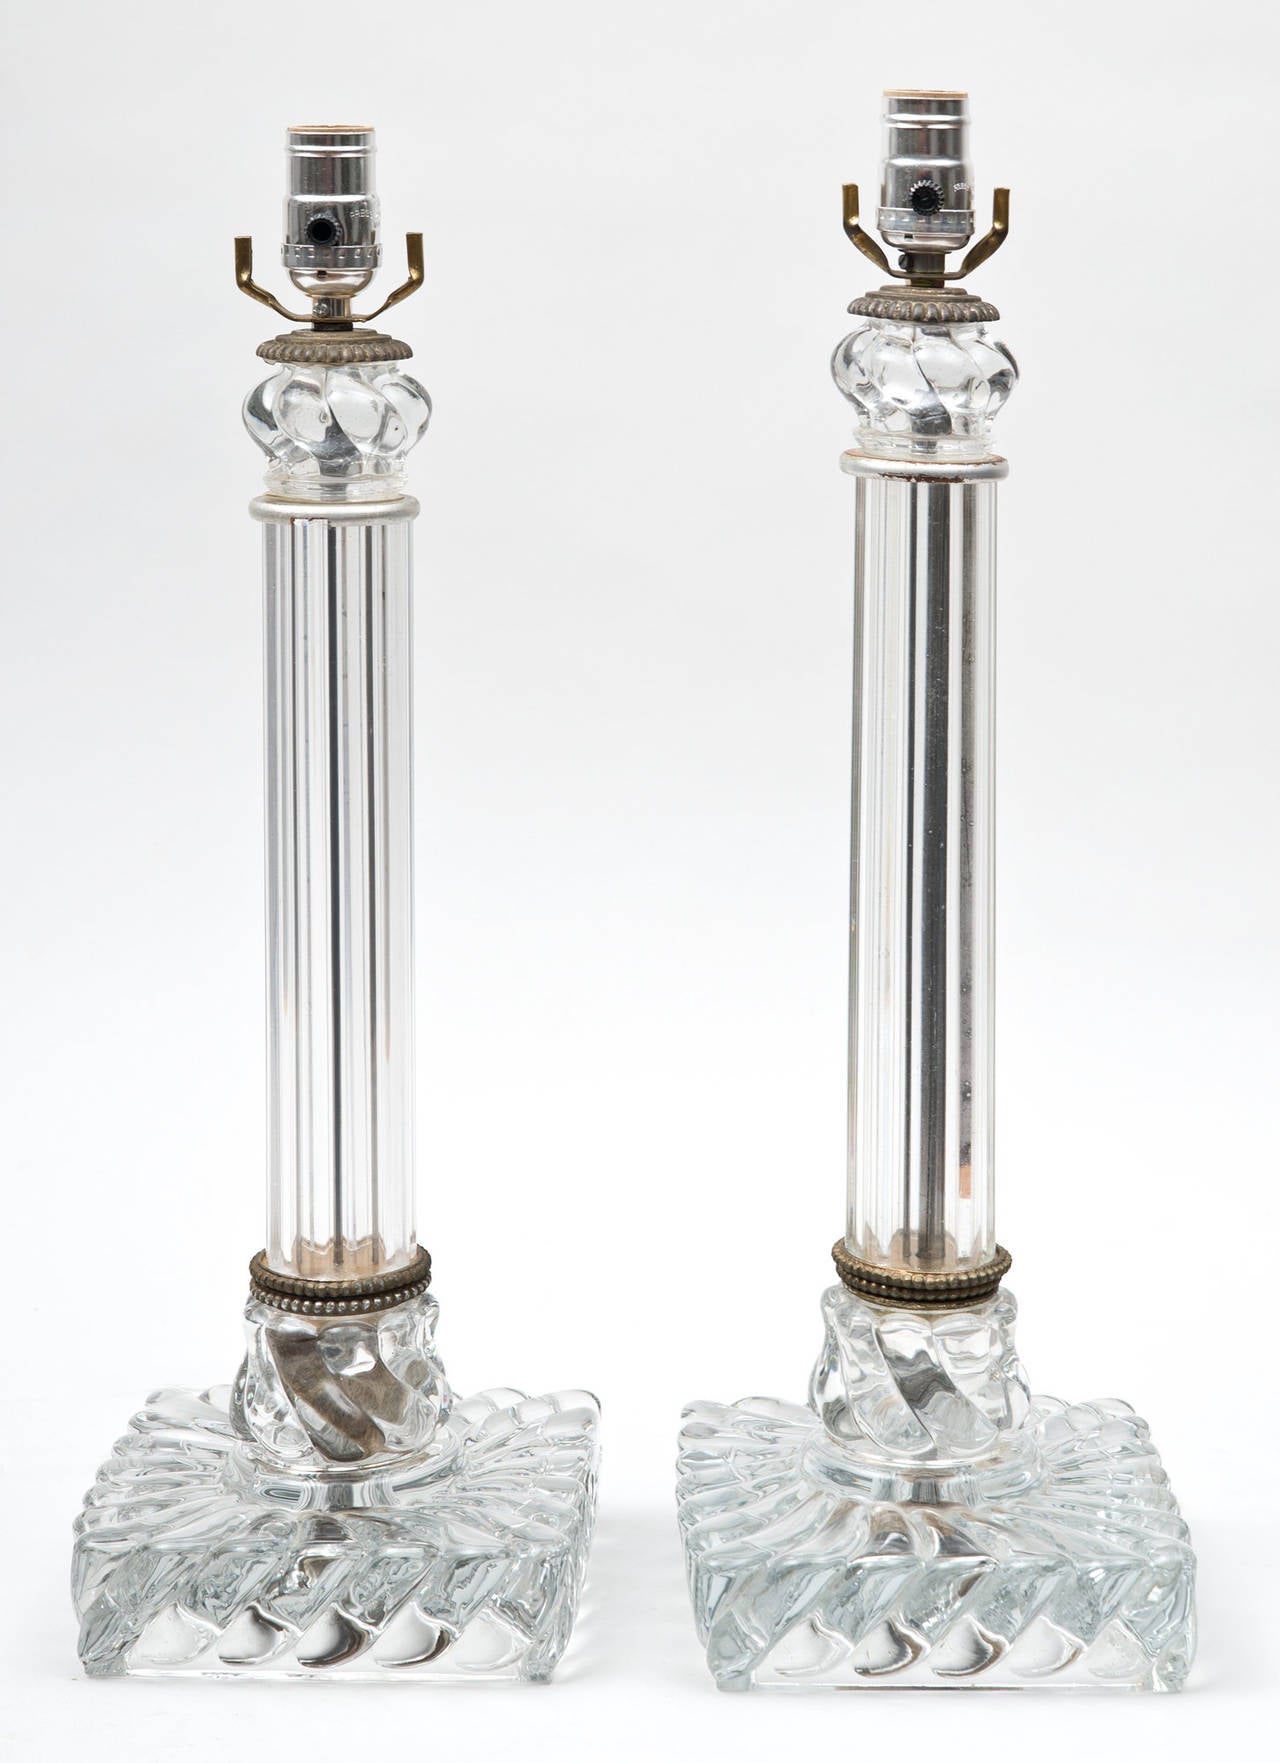 Baccarat style molded glass lamps with fluted columns and boldly swirled bases.

Item #7441.